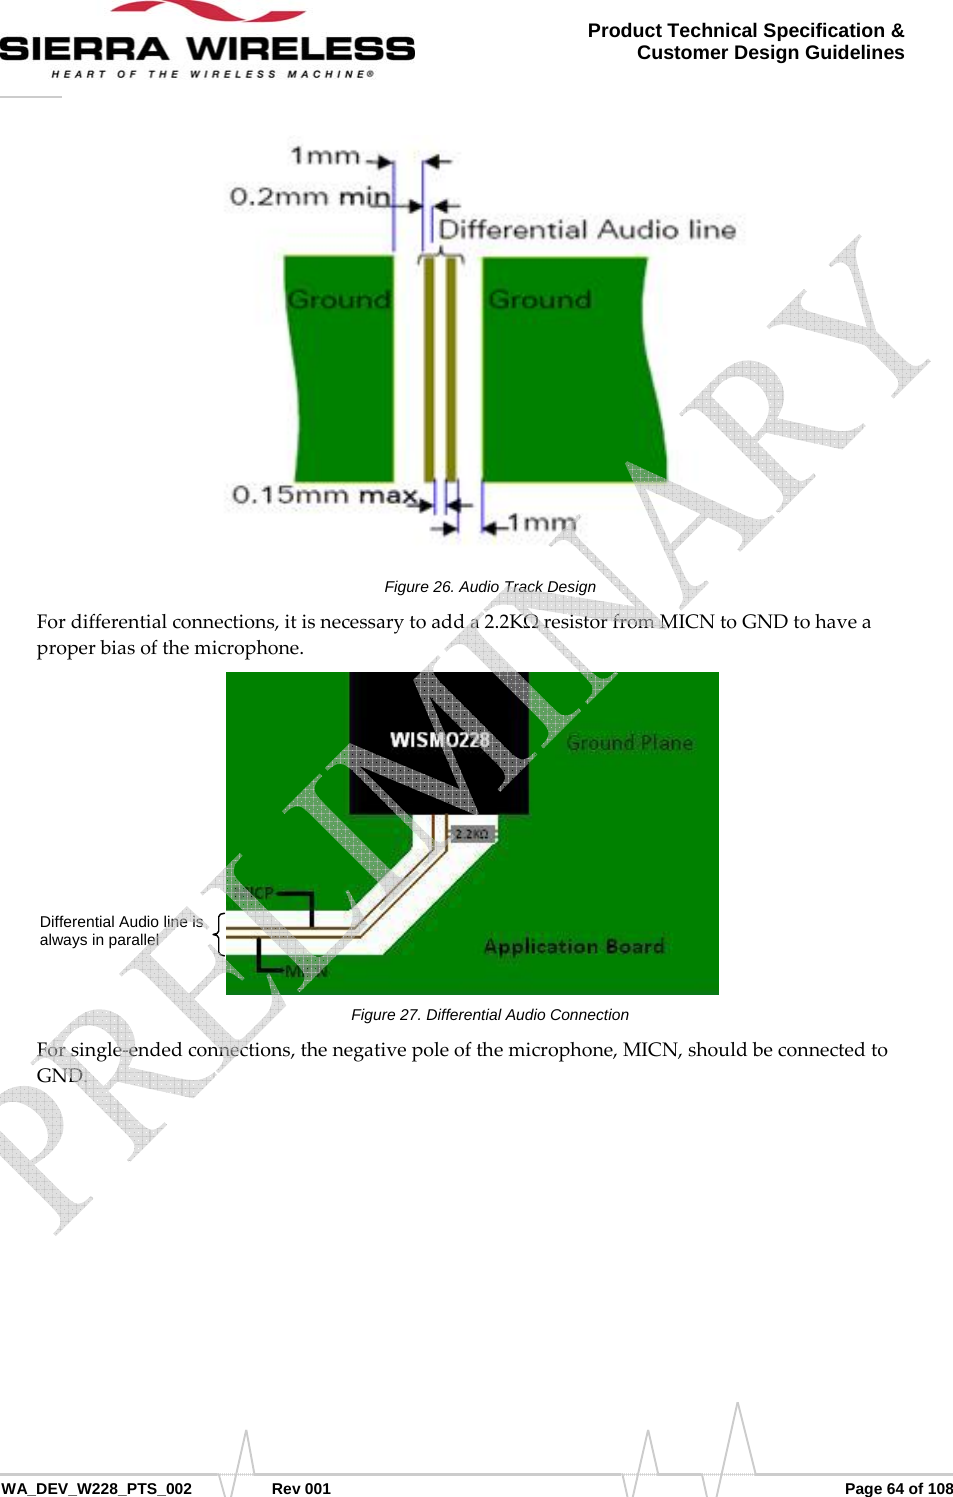      WA_DEV_W228_PTS_002 Rev 001  Page 64 of 108 Product Technical Specification &amp; Customer Design Guidelines Figure 26. Audio Track Design Fordifferentialconnections,itisnecessarytoadda2.2KΩresistorfromMICNtoGNDtohaveaproperbiasofthemicrophone.Figure 27. Differential Audio Connection Forsingle‐endedconnections,thenegativepoleofthemicrophone,MICN,shouldbeconnectedtoGND.Differential Audio line is always in parallel    